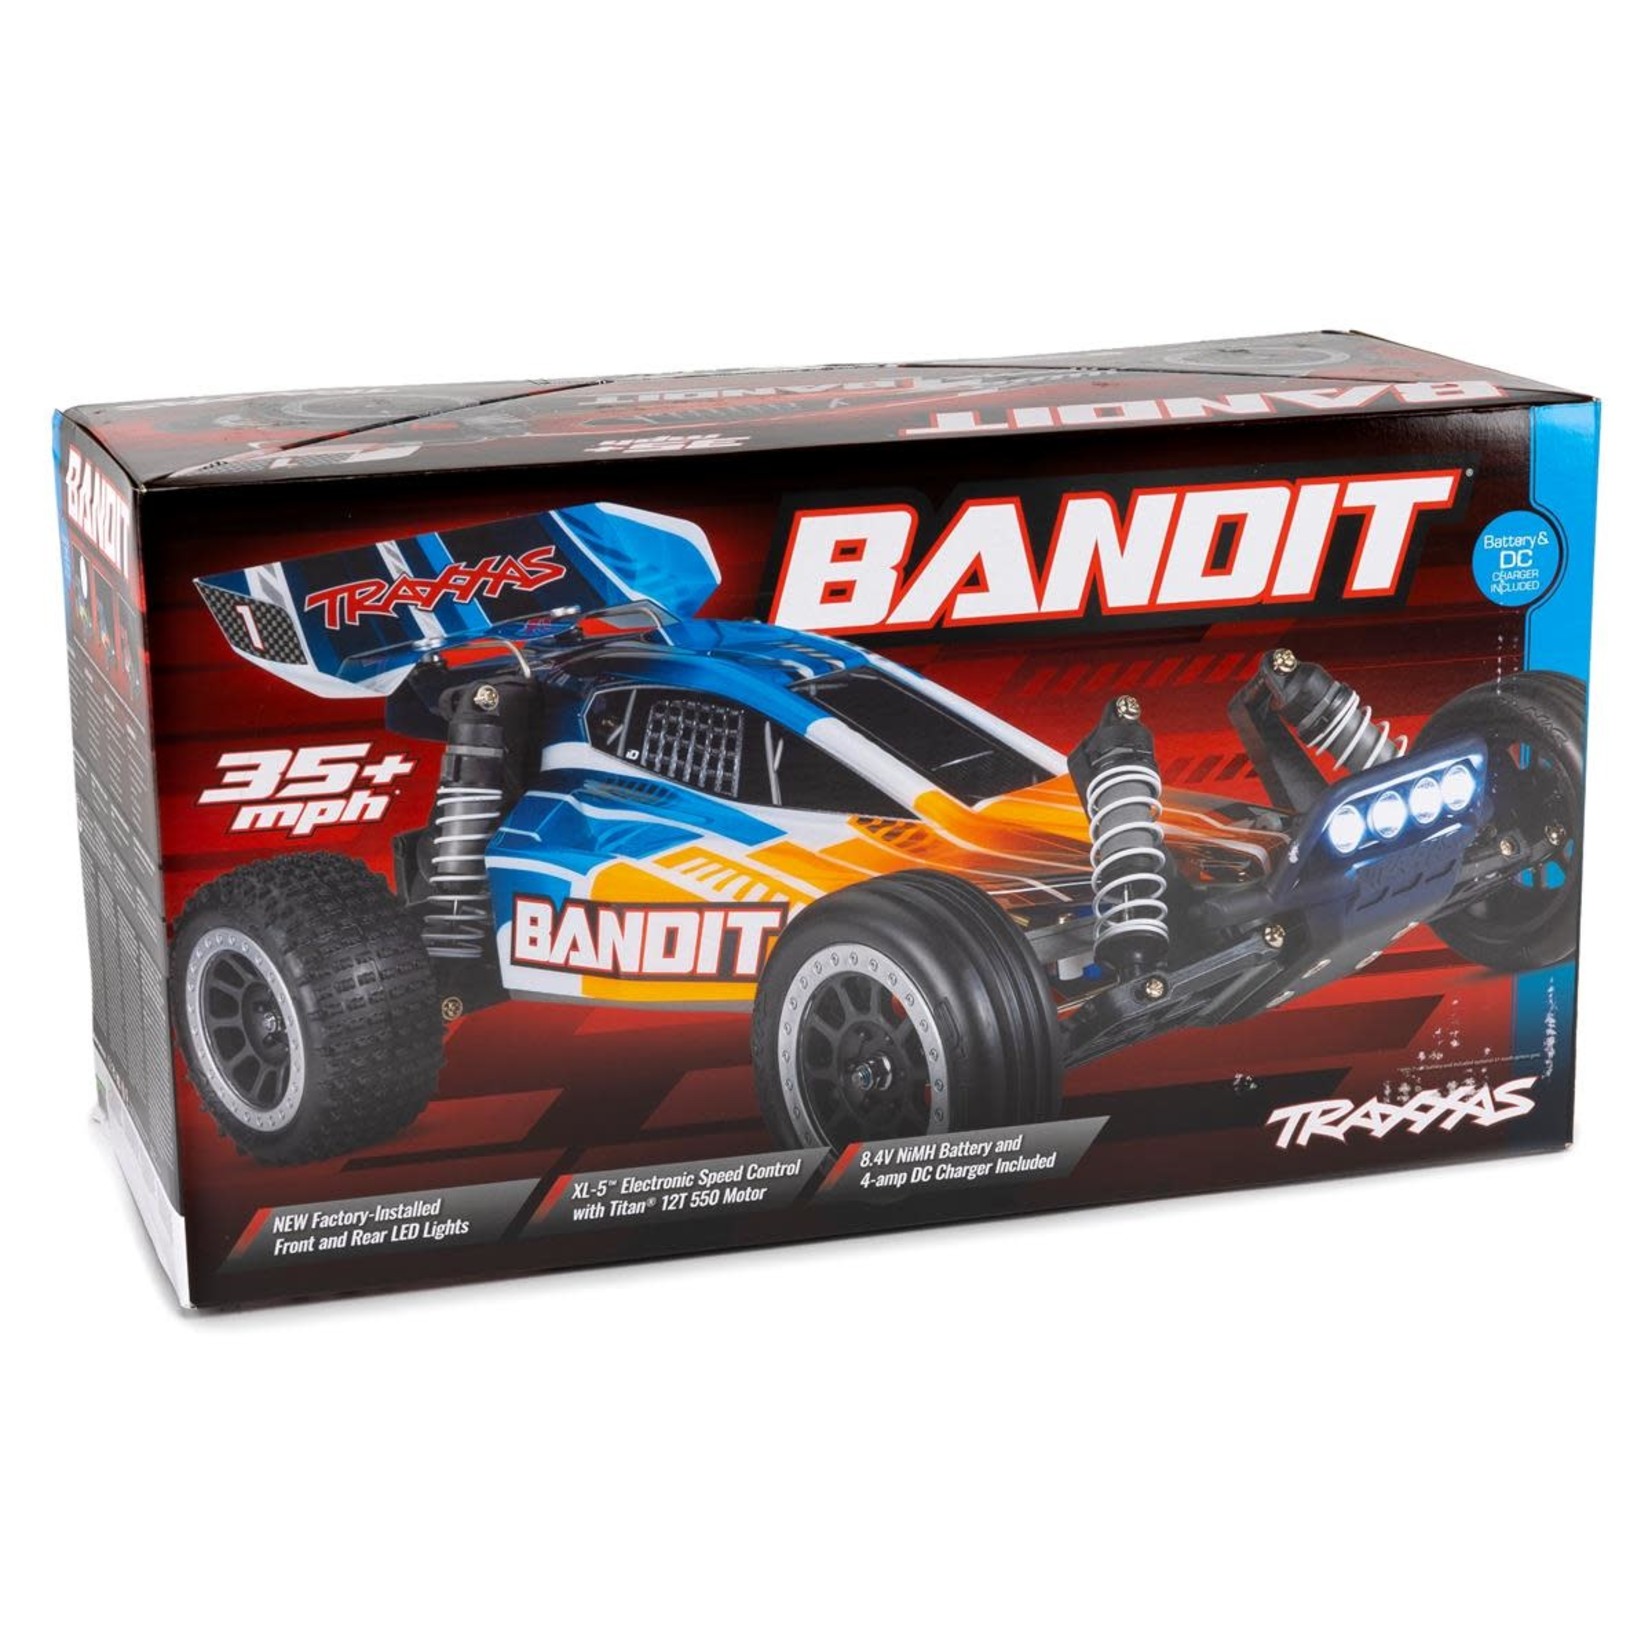 Traxxas Traxxas Bandit 1/10 RTR 2WD Electric Buggy w/LED Lights (Red/Black) w/XL-5 ESC, TQ 2.4GHz Radio, Battery & DC Charger #24054-61-RBLK